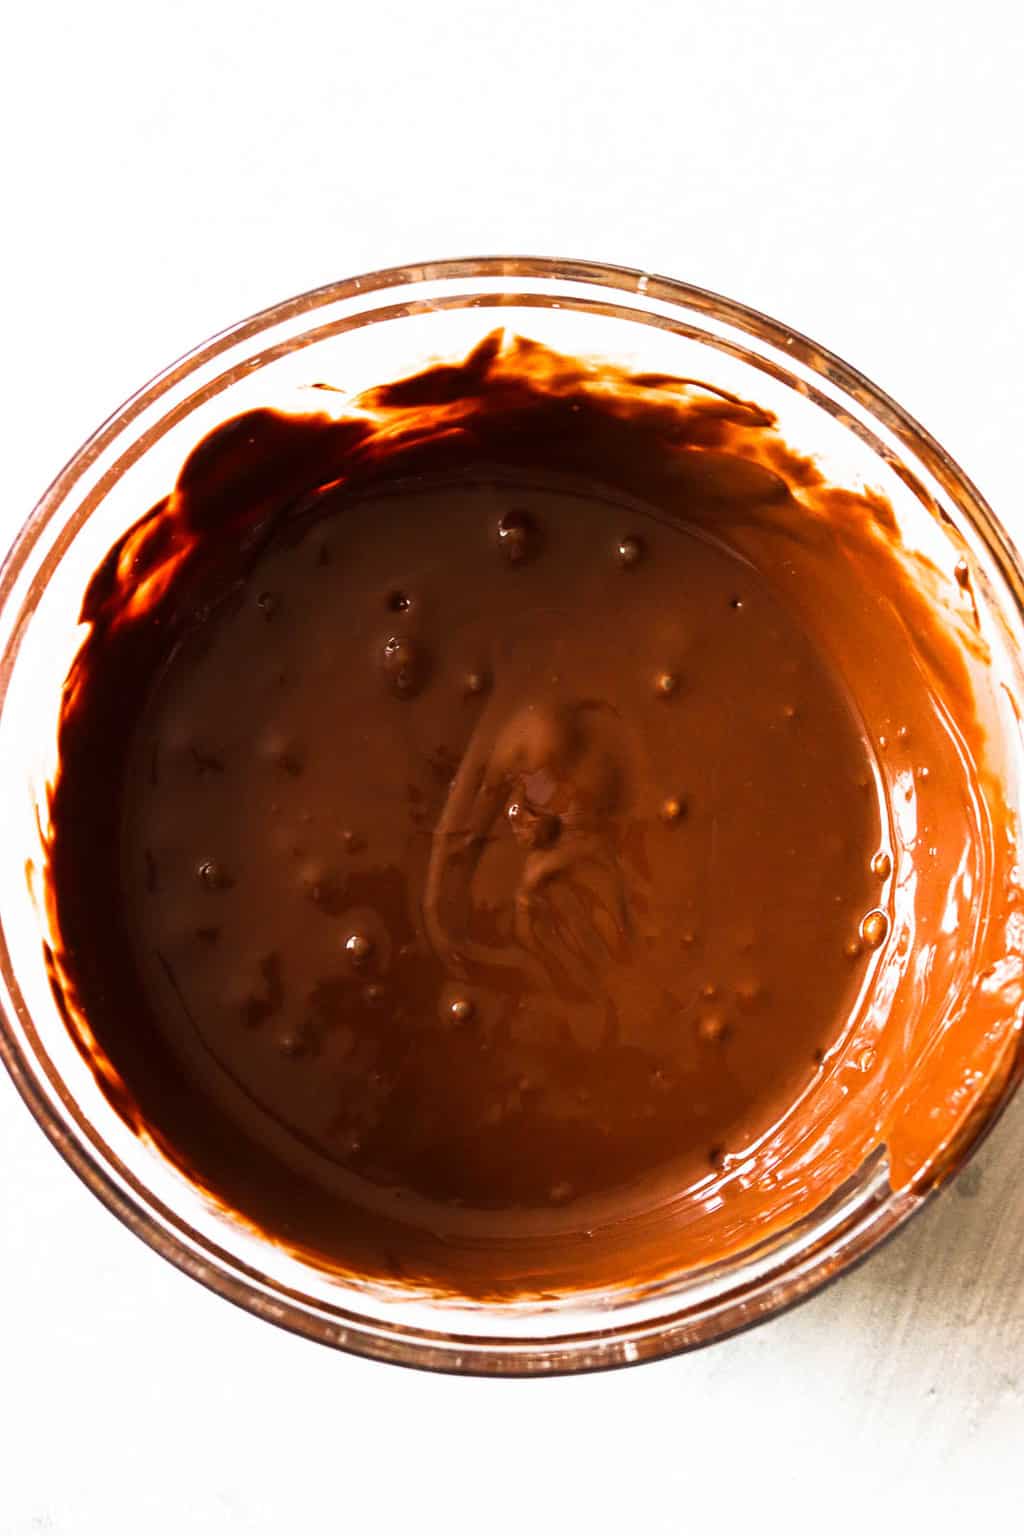 An overhead shot of a small mixing bowl with melted chocolate in it